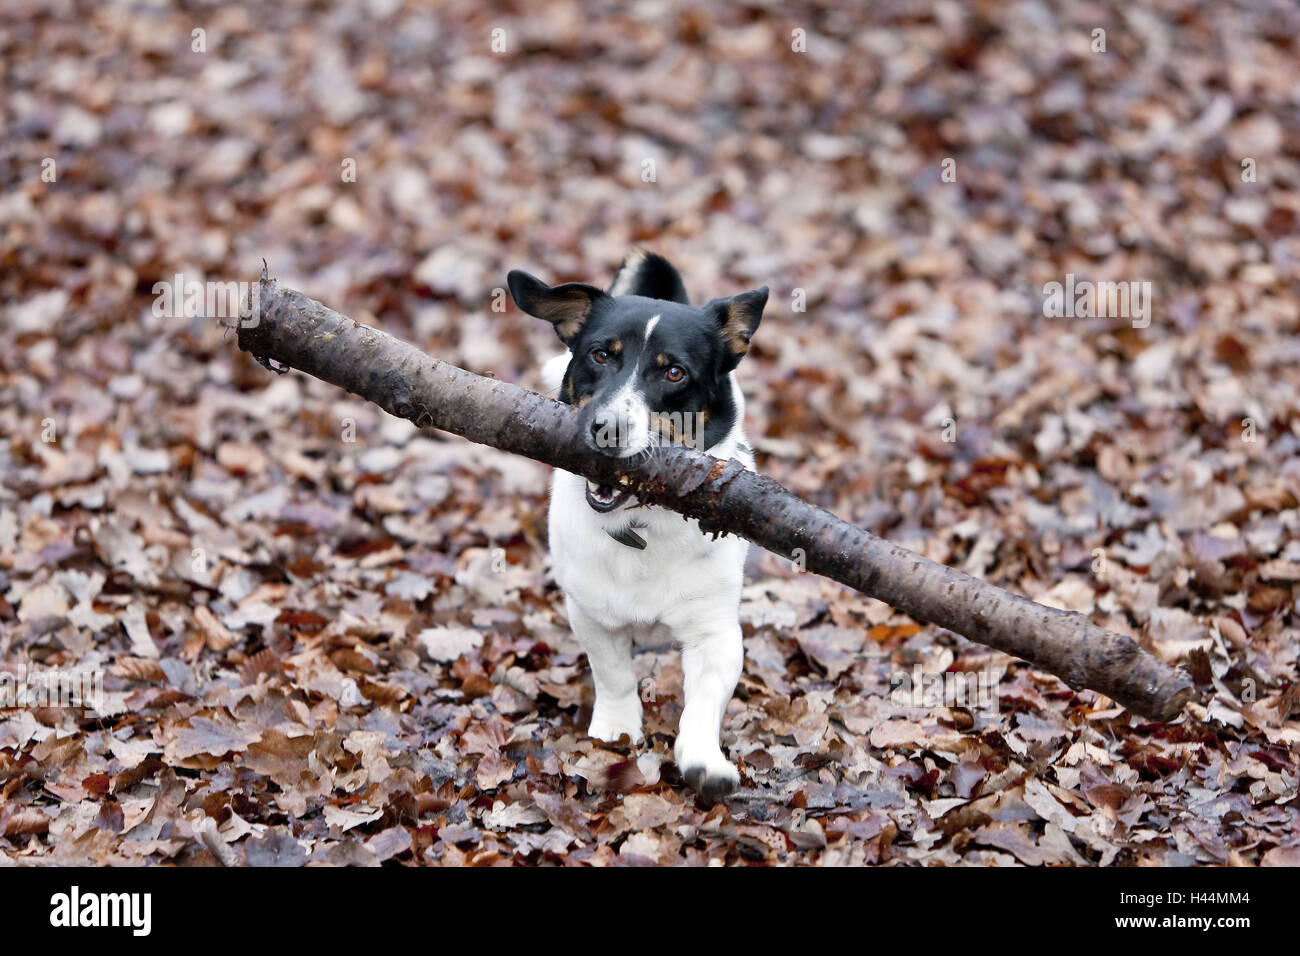 A dog, Jack Russel Terrier, with of a big bat in the mouth, funnily, Stock Photo